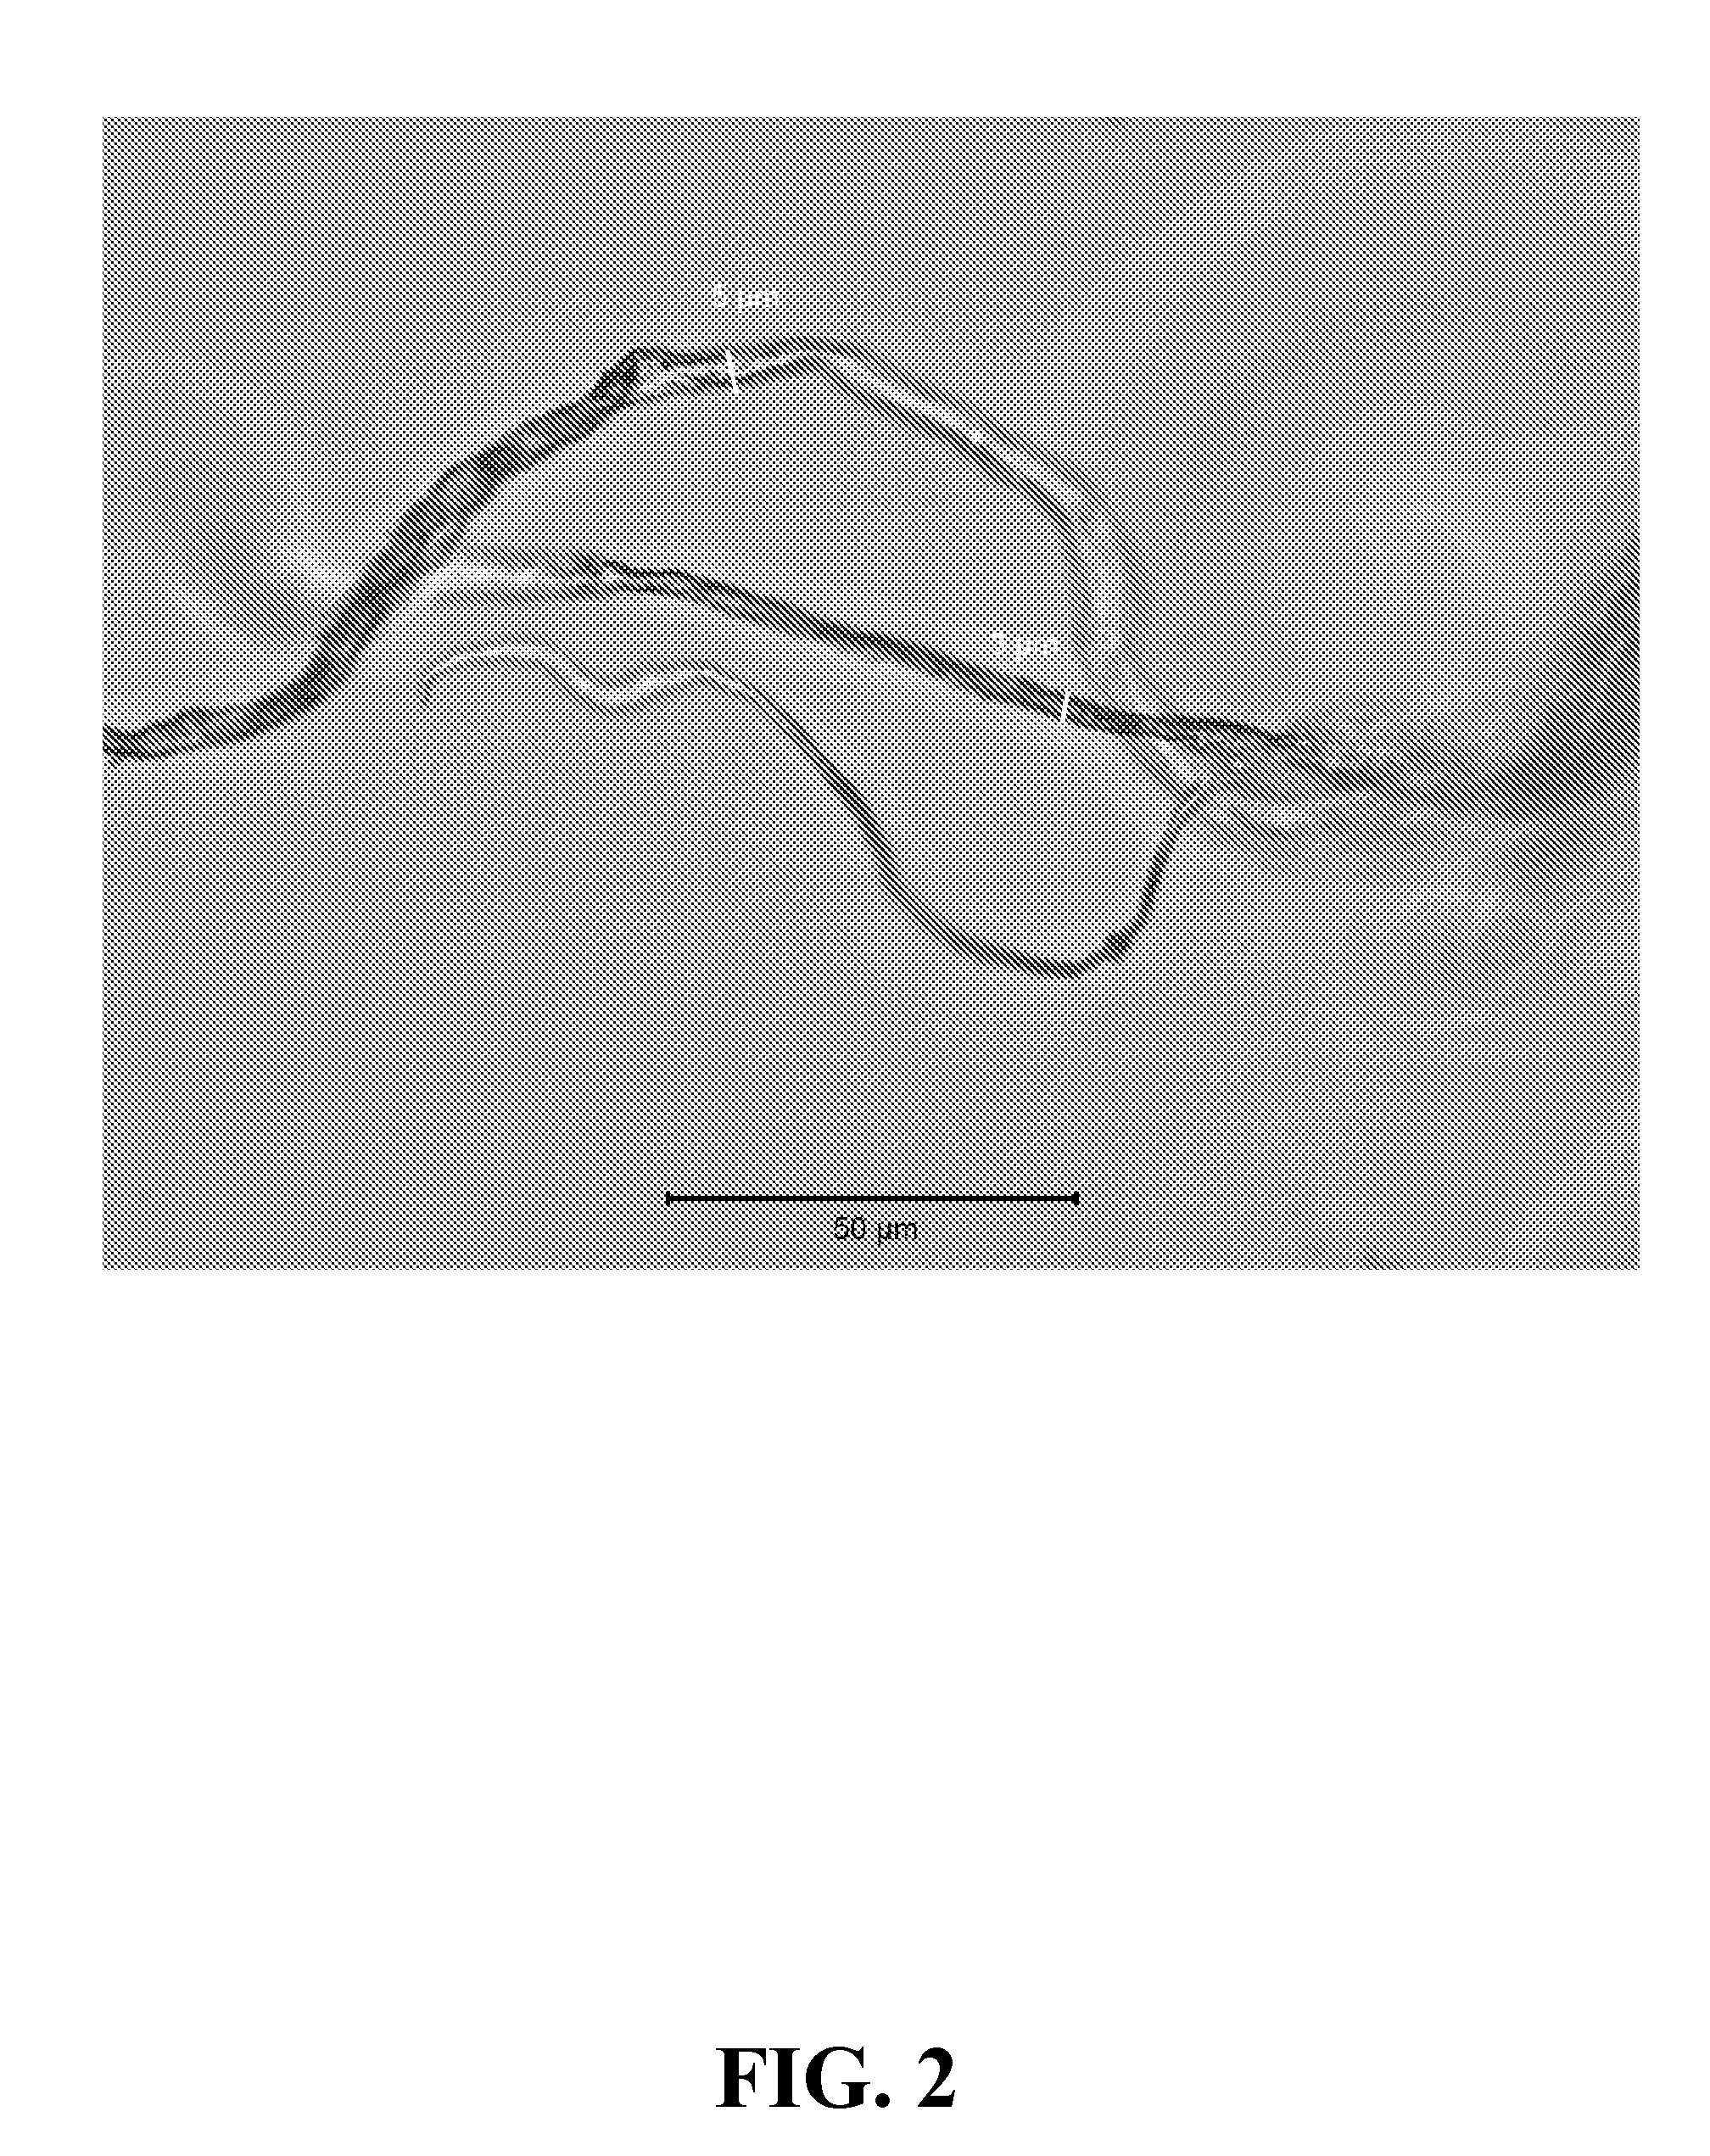 Mixed polymer superabsorbent fibers containing cellulose